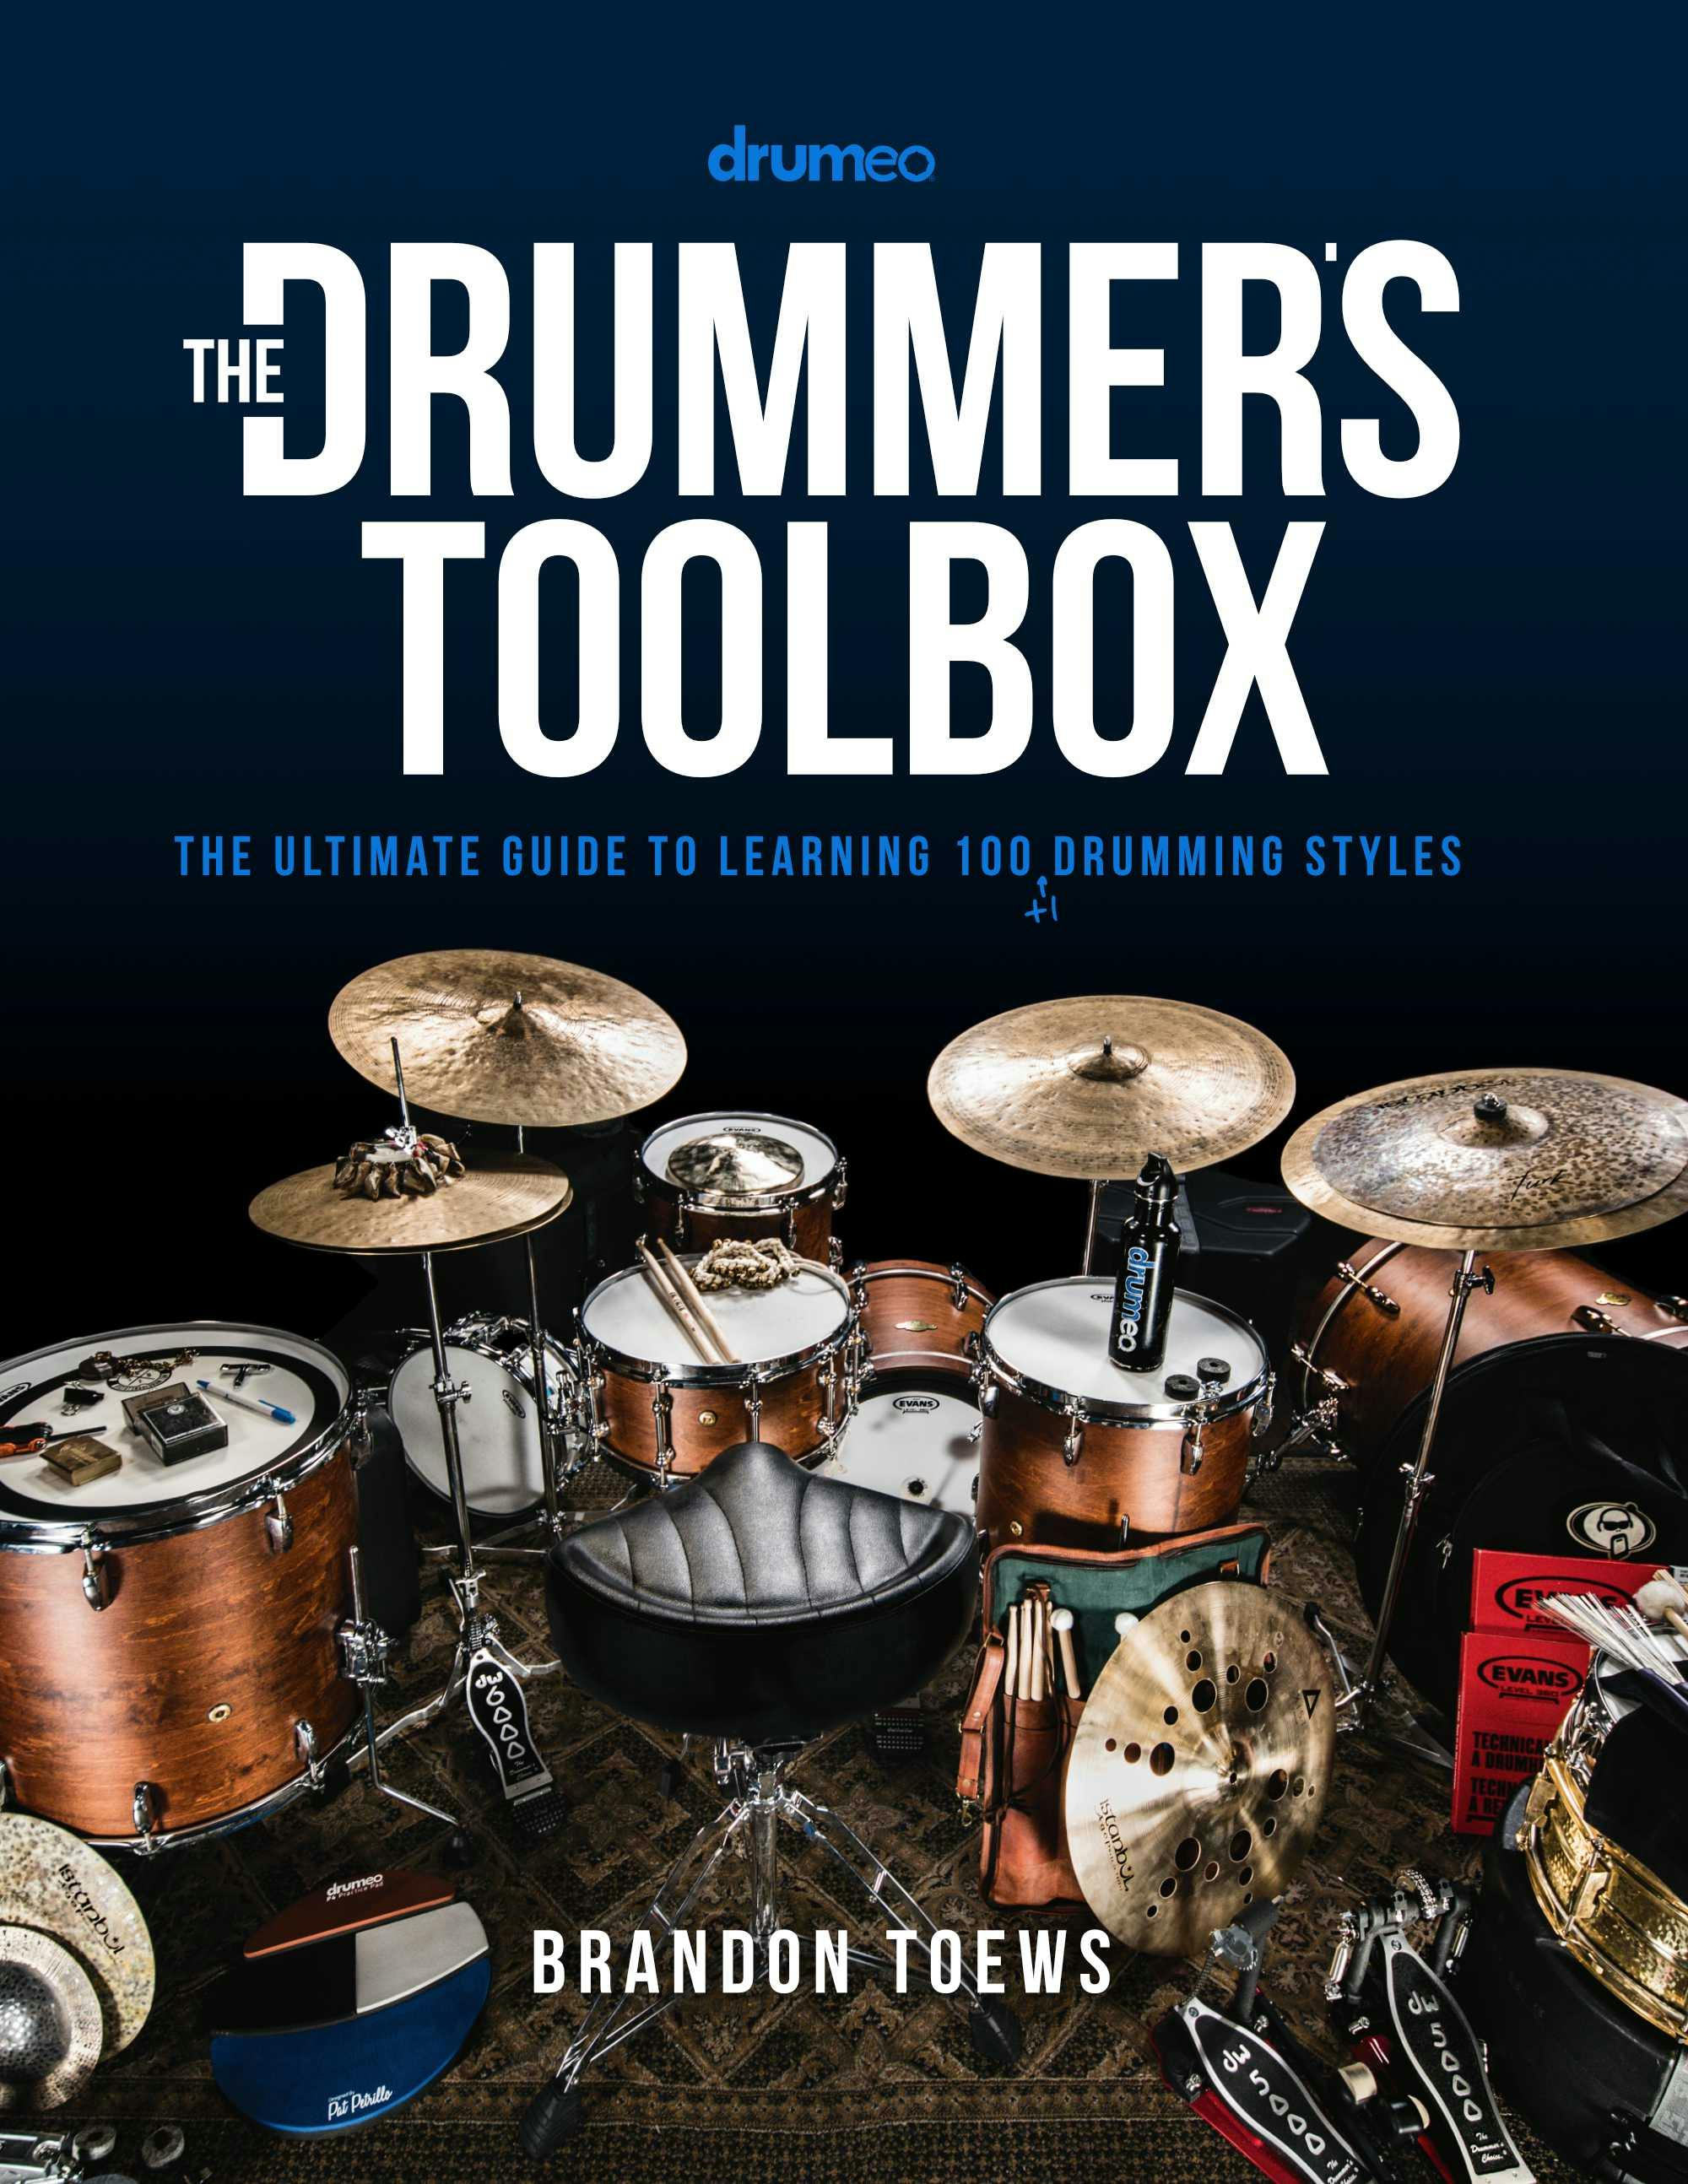 The Drummer's Toolbox - undefined